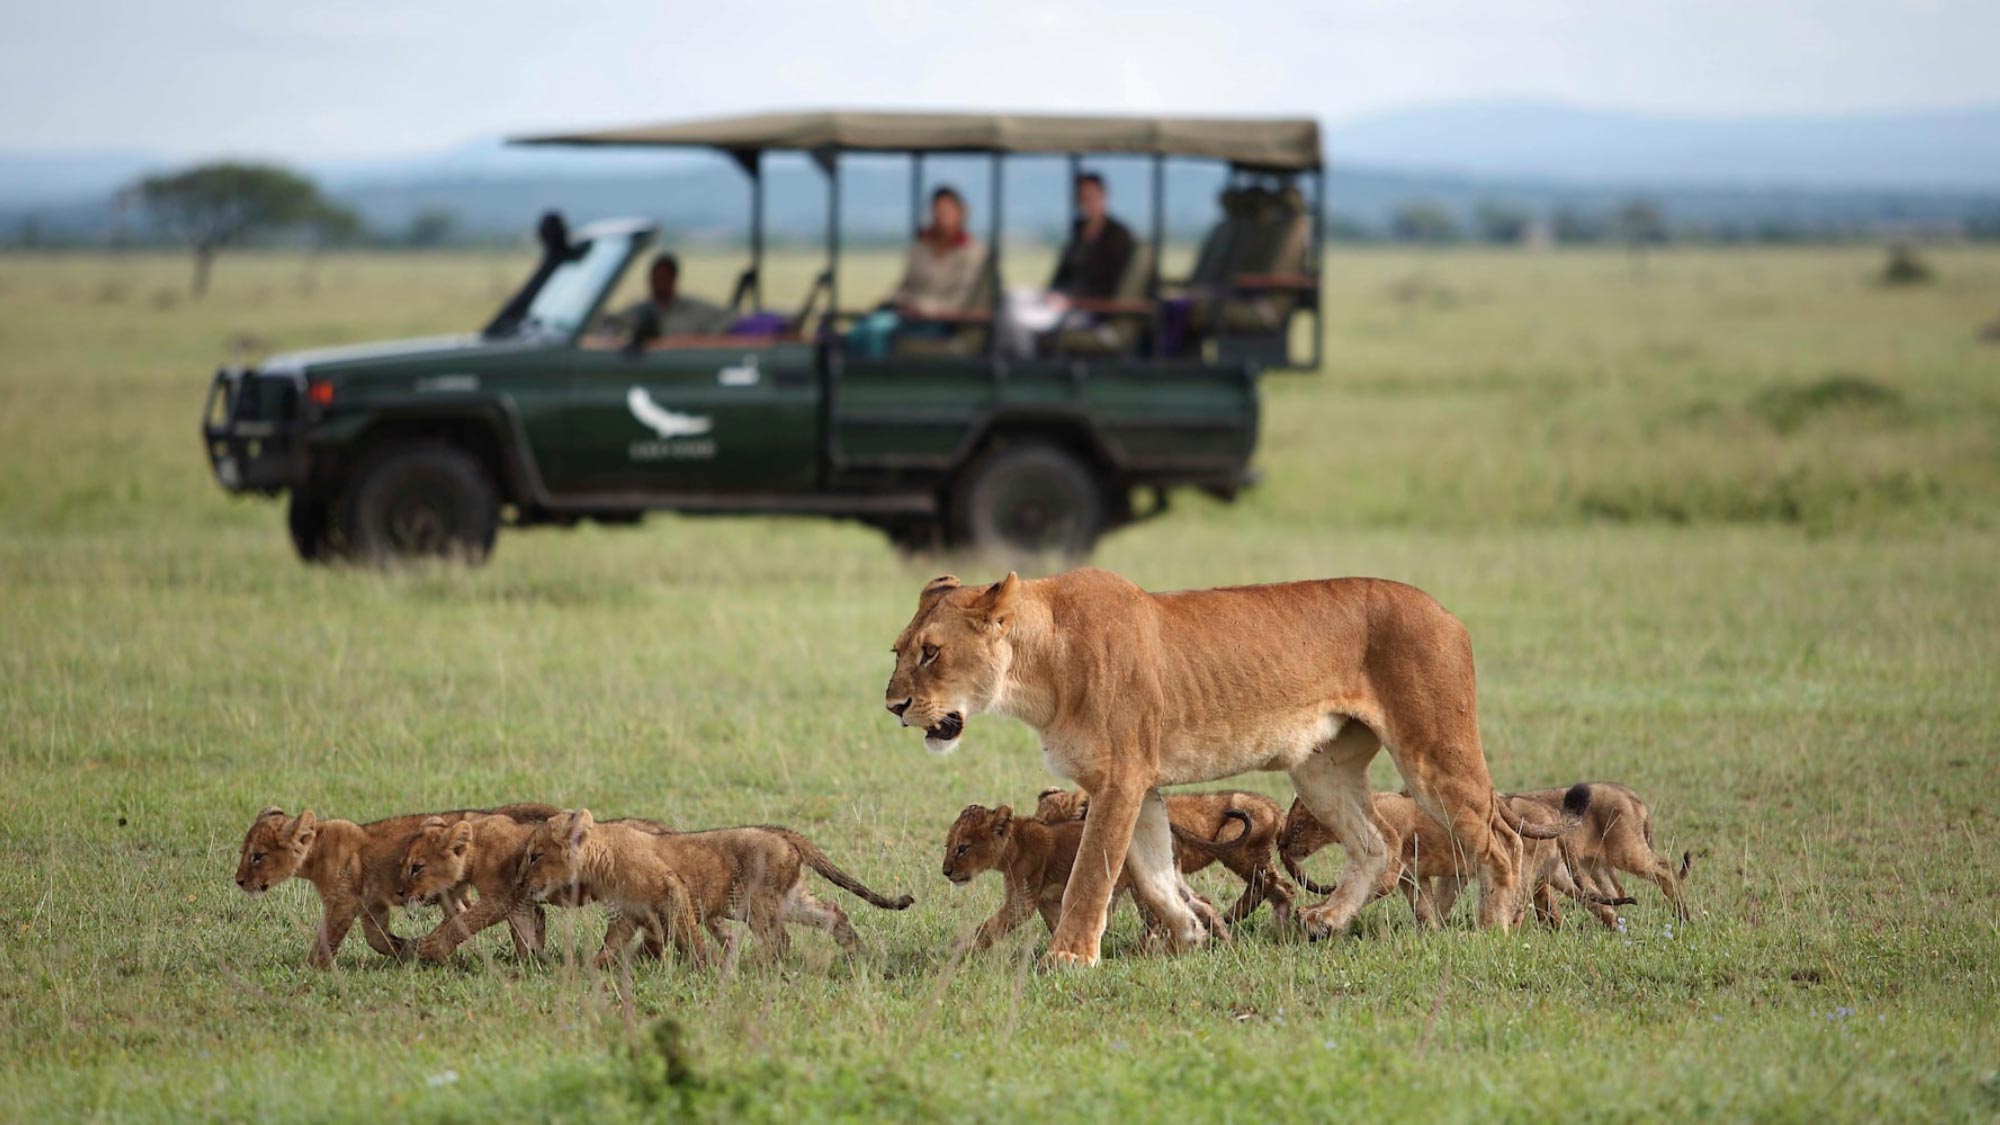 Discover the rugged beauty of the Western Serengeti in Tanzania, home to vast savannahs and abundant wildlife. Experience thrilling safari adventures with sightings of large lion prides, herds of wildebeest, zebra, and other iconic animals in this extraordinary region.